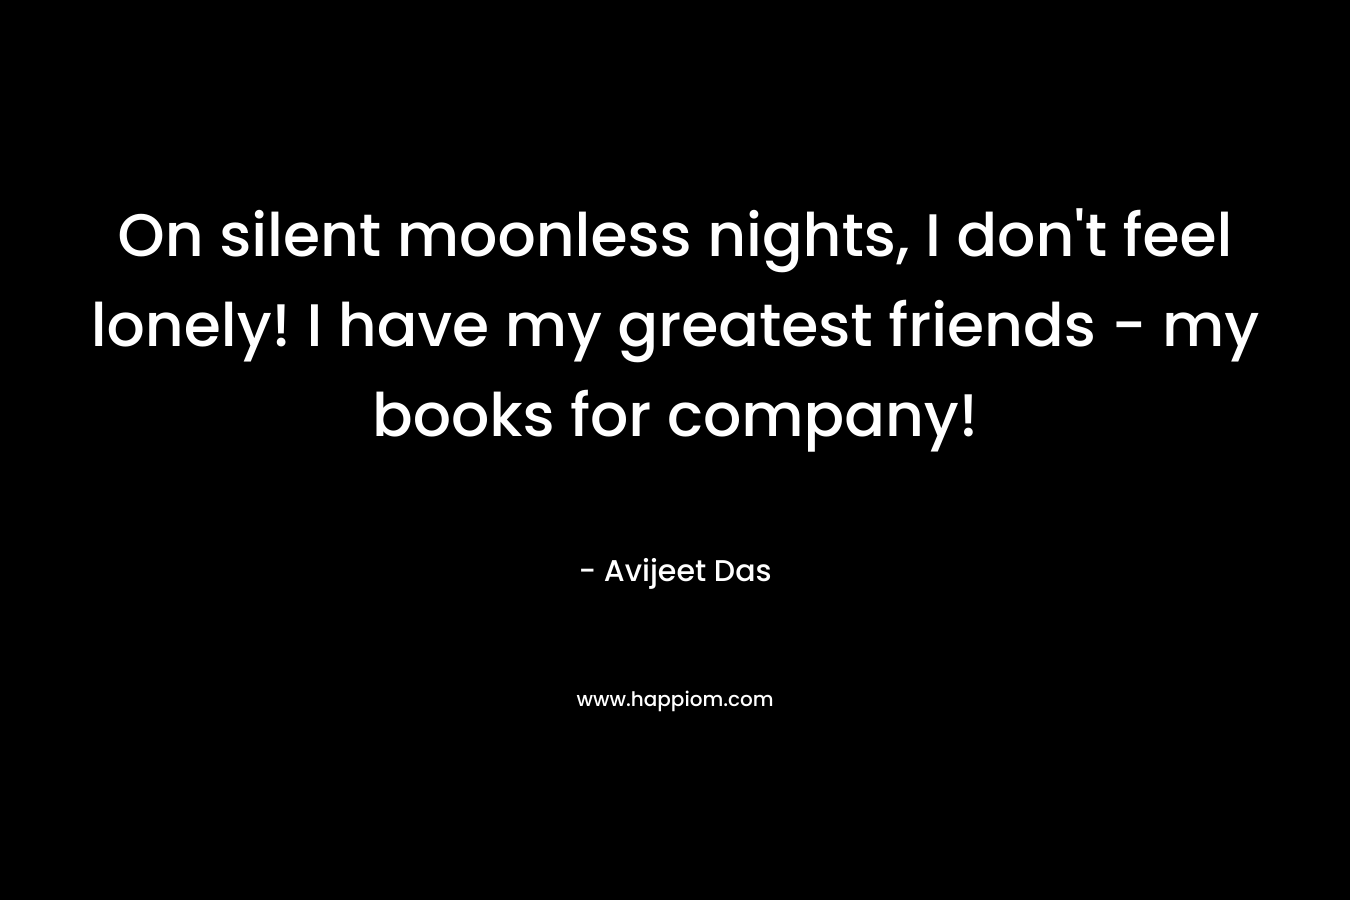 On silent moonless nights, I don't feel lonely! I have my greatest friends - my books for company!